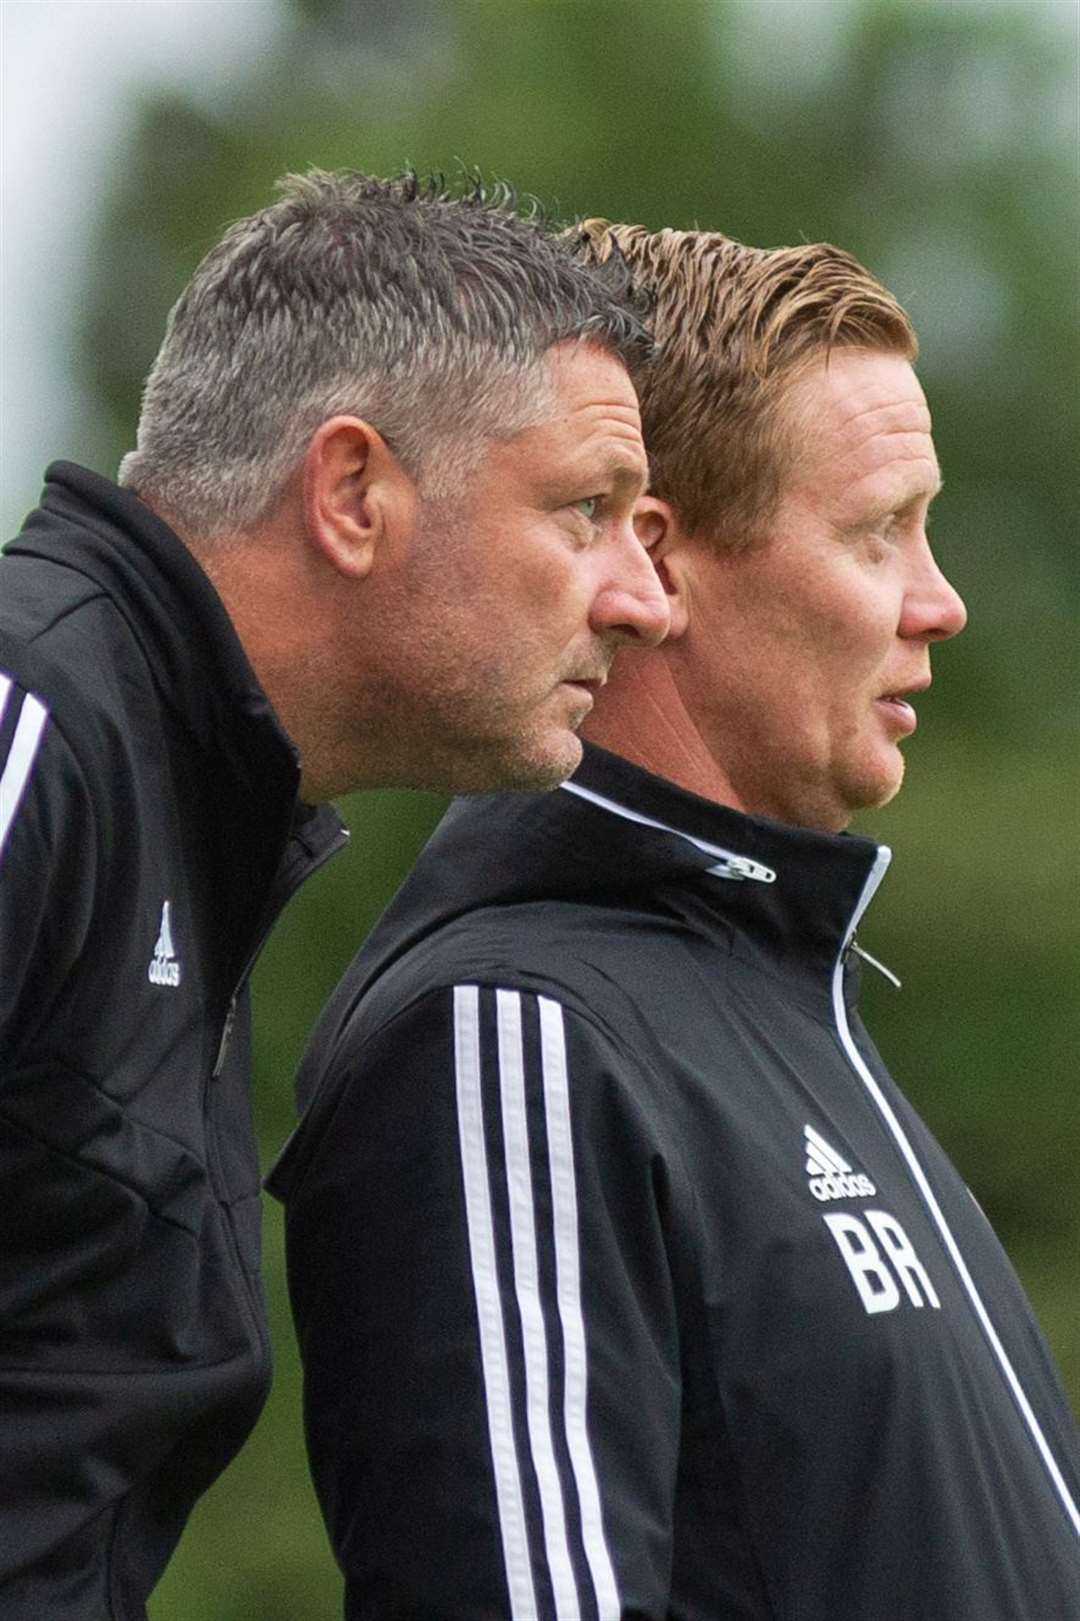 Tony Docherty and Barry Robson...125th Anniversary match between Elgin City FC (8) and an Aberdeen XI (1) - Borough Briggs, Elgin - 4th July 2019...Picture: Daniel Forsyth. Image No.044377.